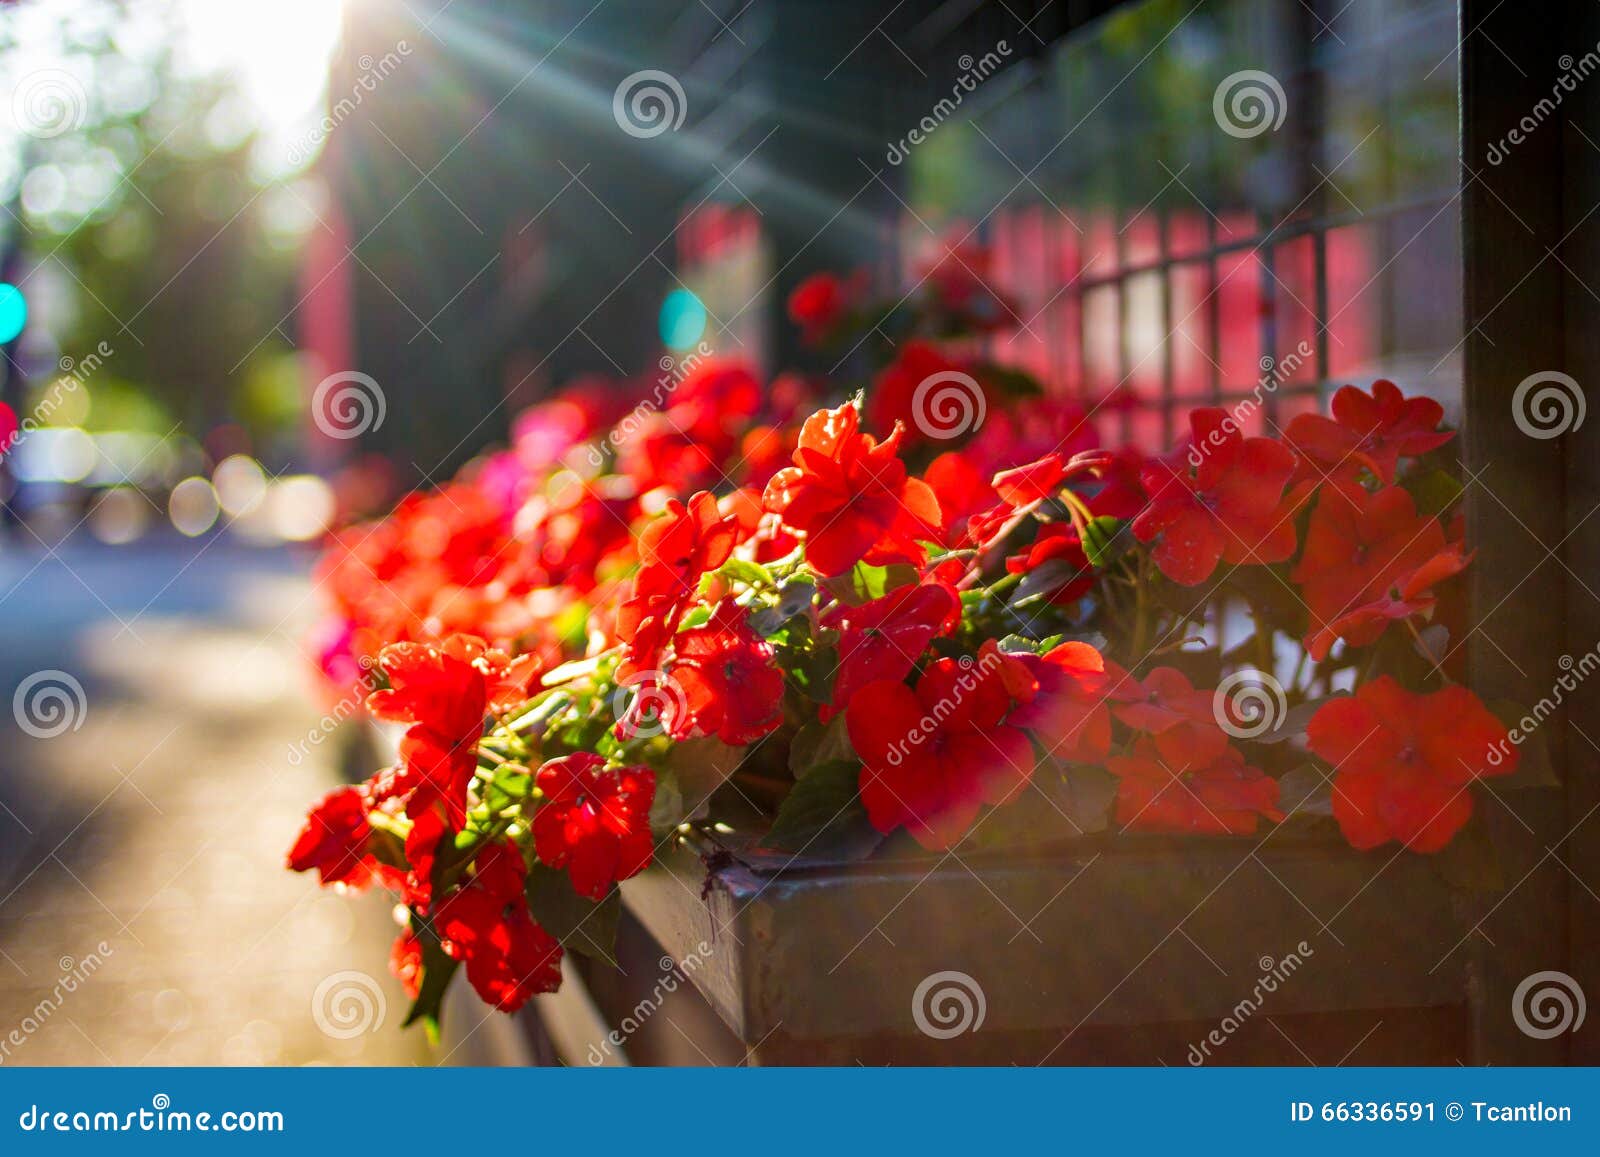 planter with red flowers